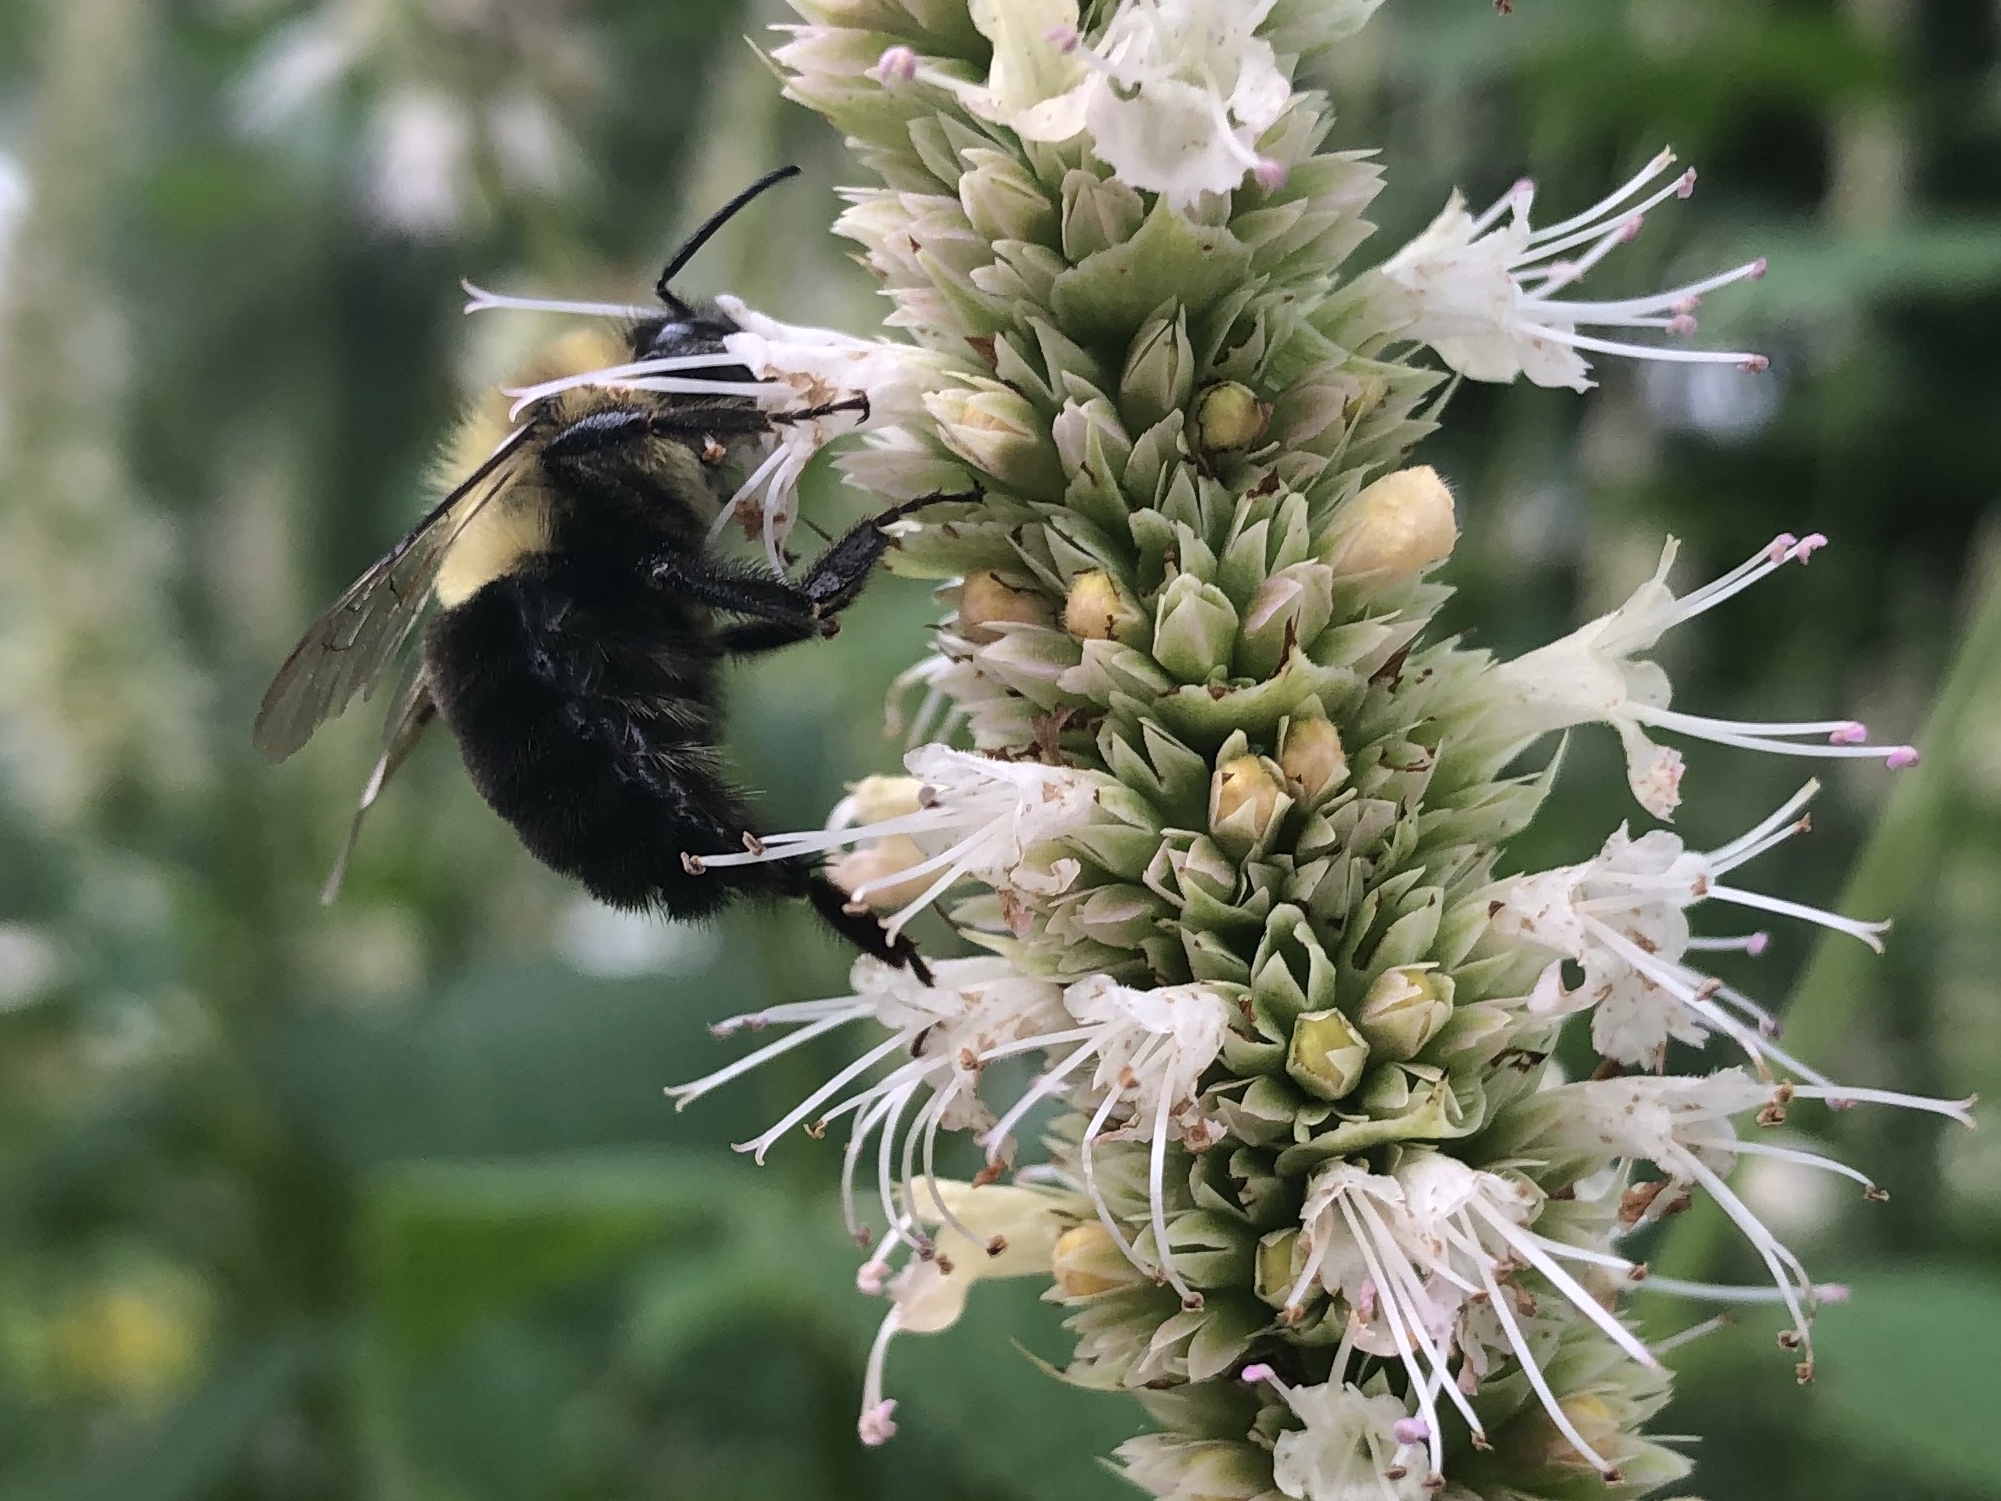 Bumblebee on Hyssop on August 11, 2019.